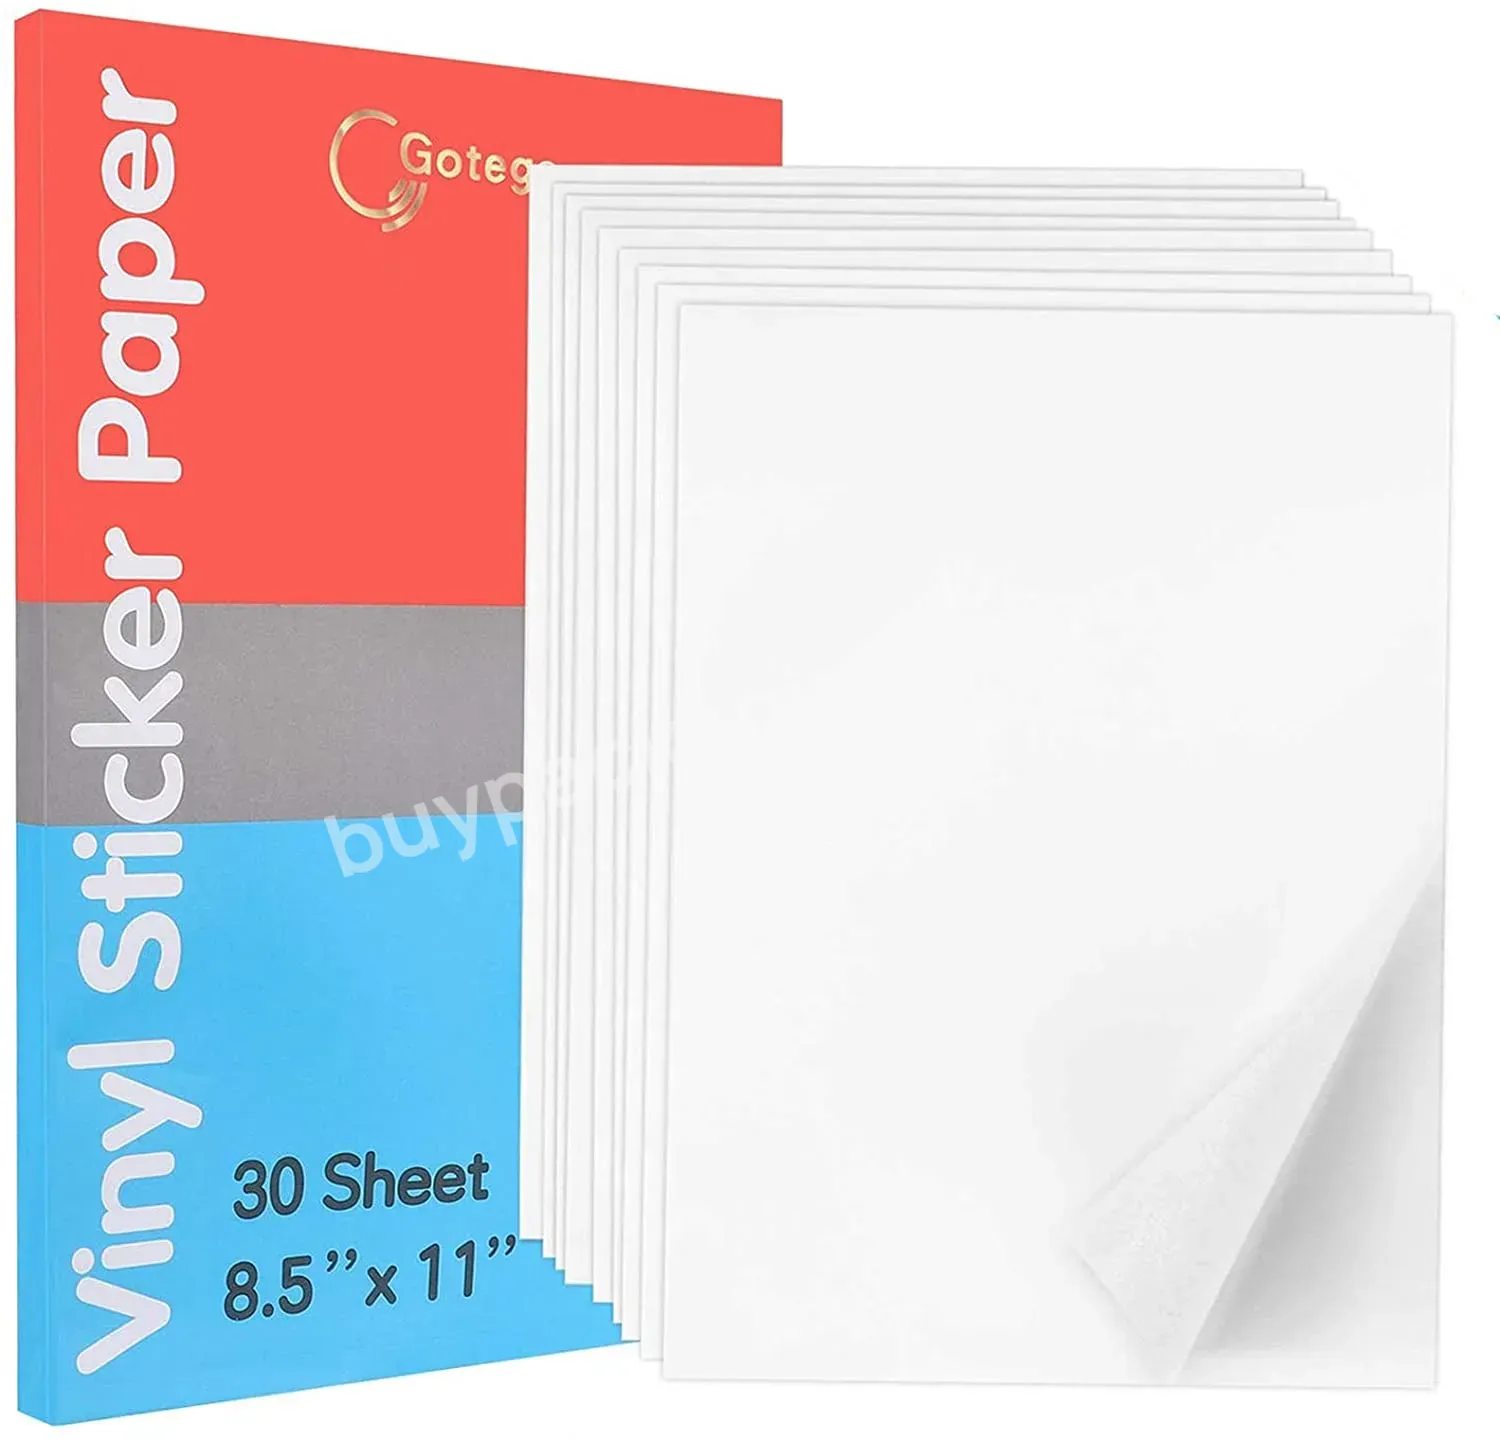 Waterproof Sticker Paper Sheets Free Design Custom A4 Vinyl Adhesive Sticker Datang Double Side Cmyk Custom Size 1000 Accept - Buy Vinyl Sticker Sheets,A4 Vinyl Sticker Paper,Vinyl Waterproof Stickers.